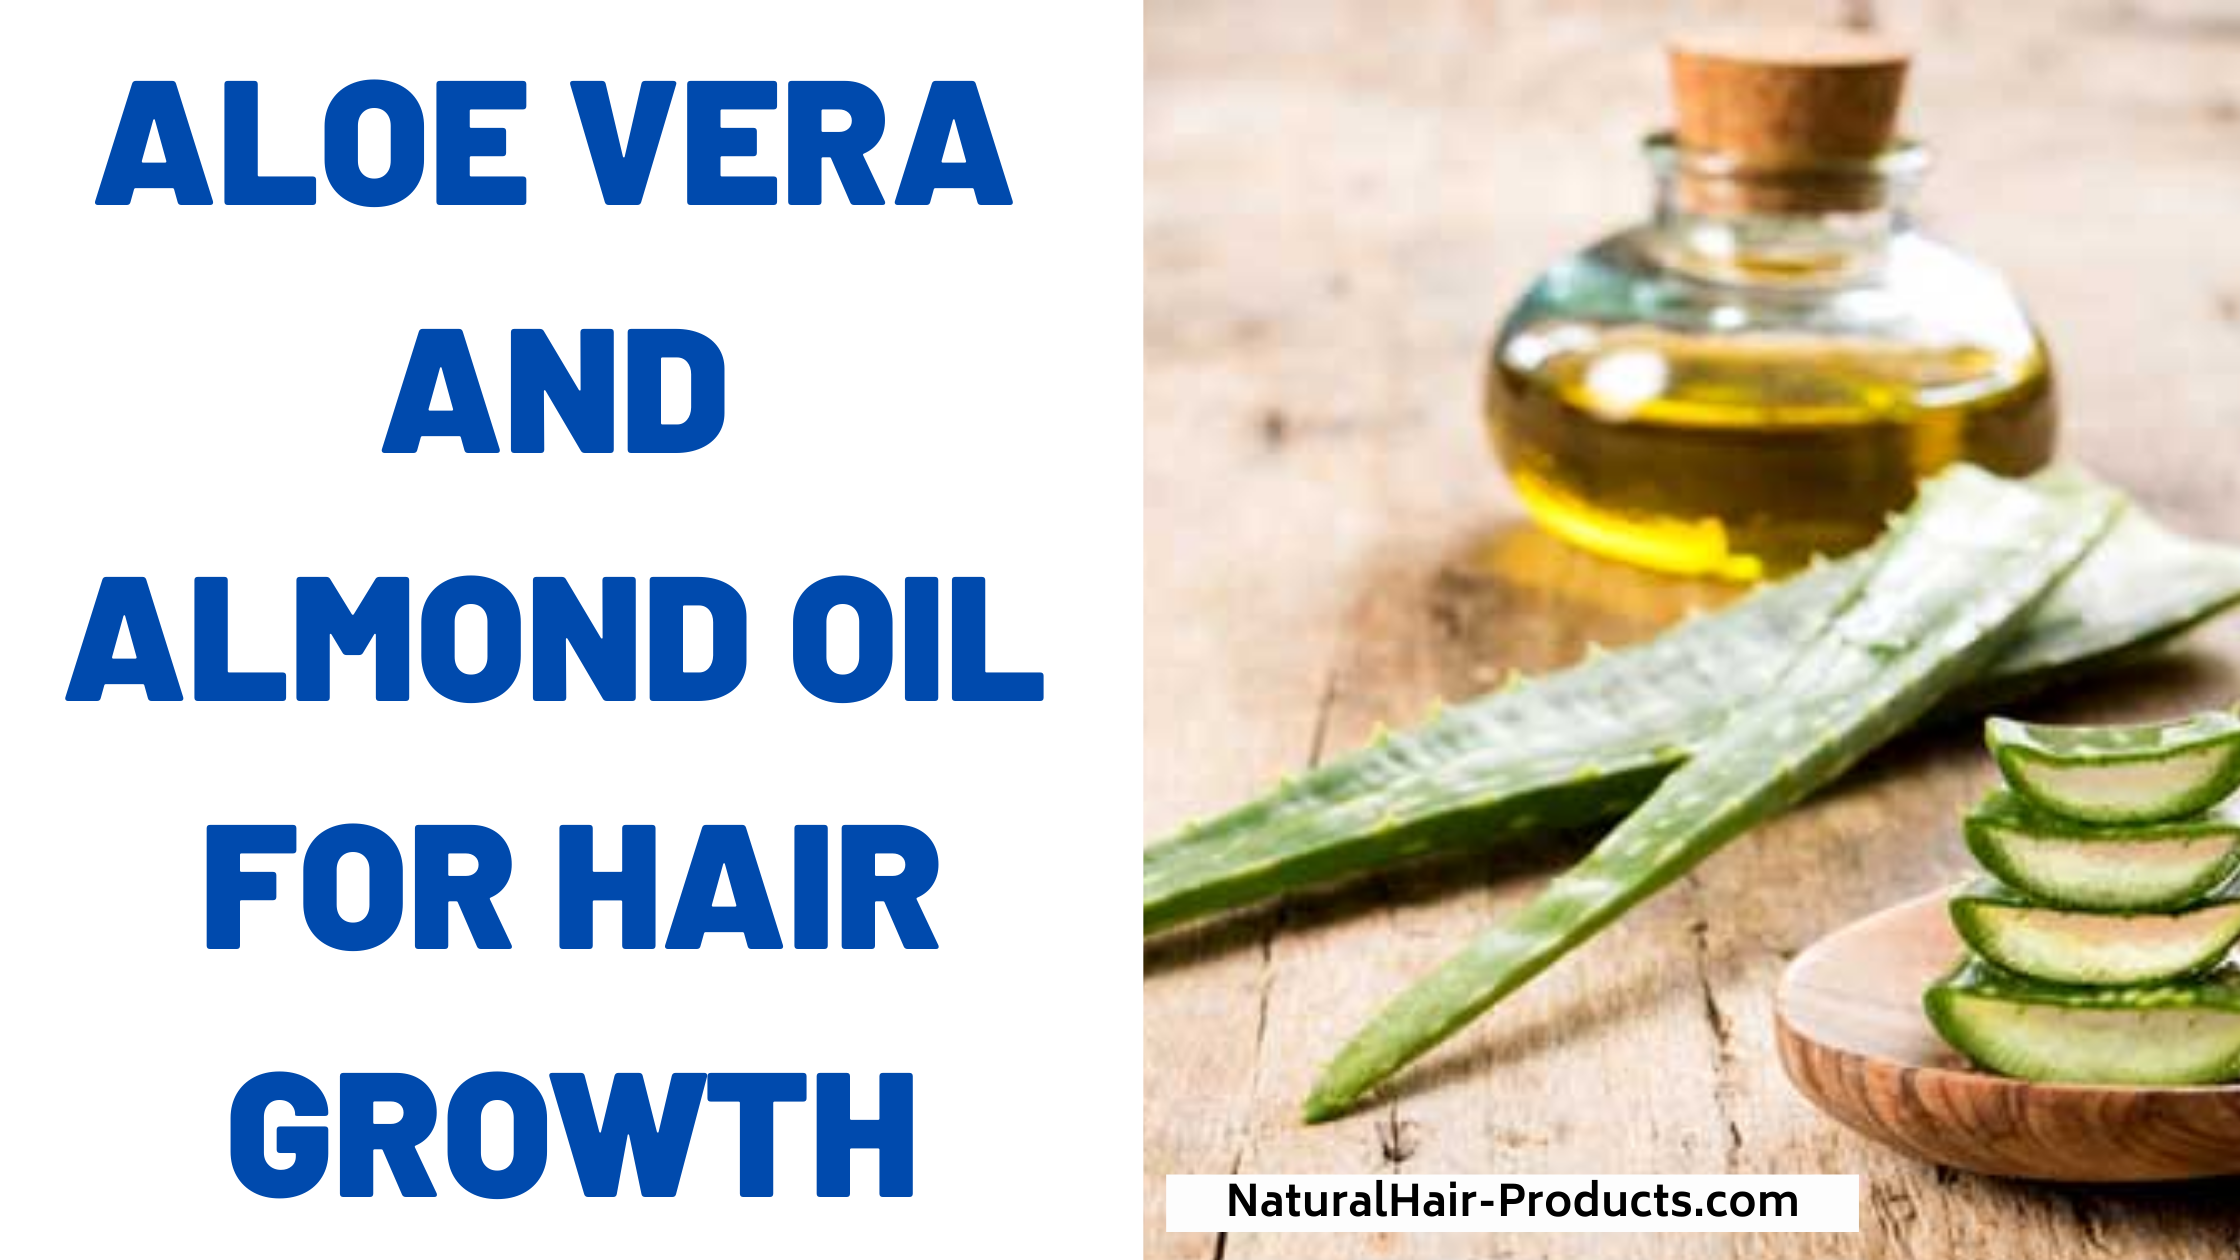 Aloe vera and almond oil for hair growth